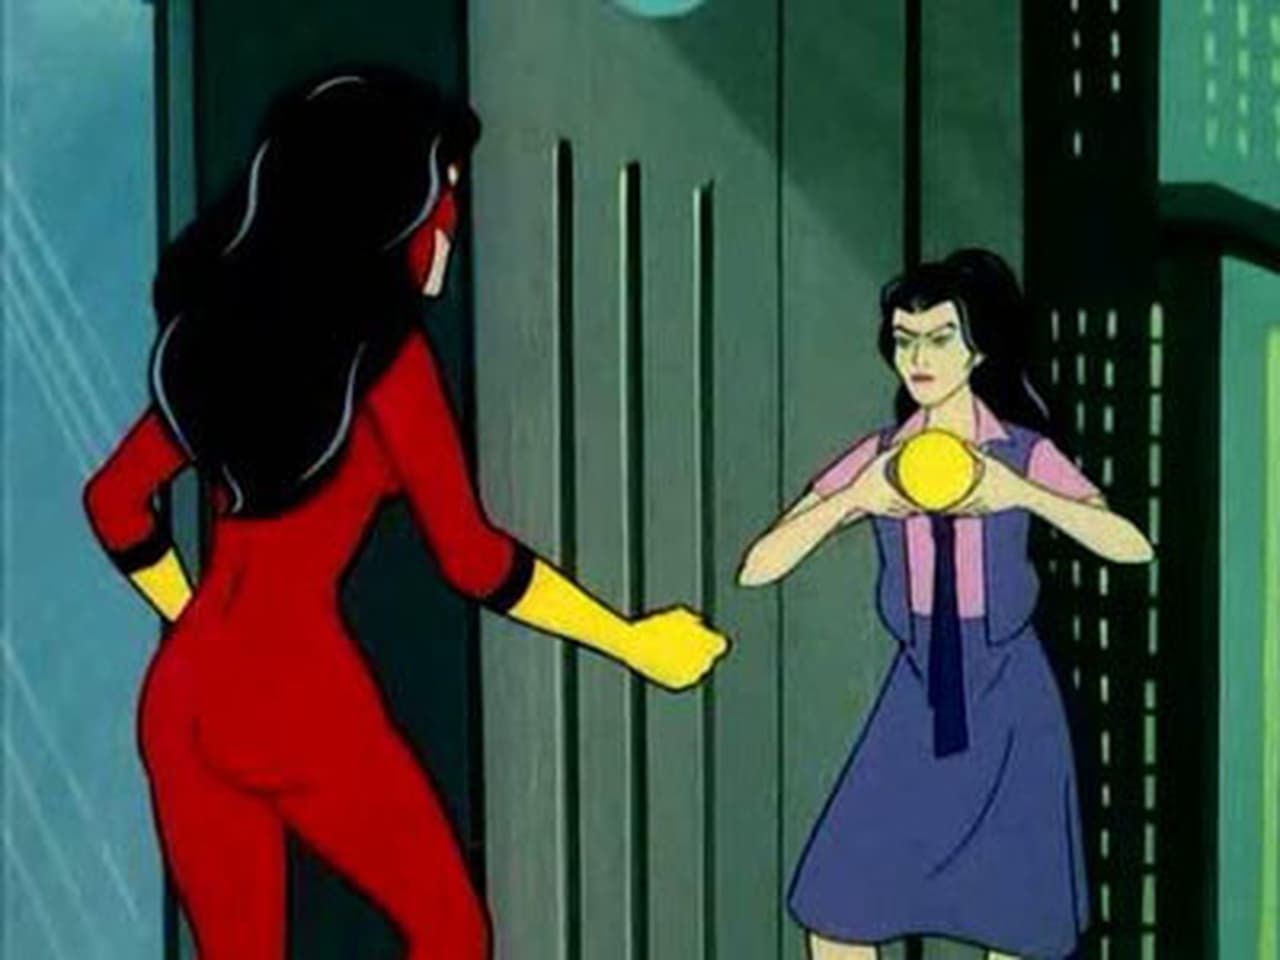 Image Spider-Woman